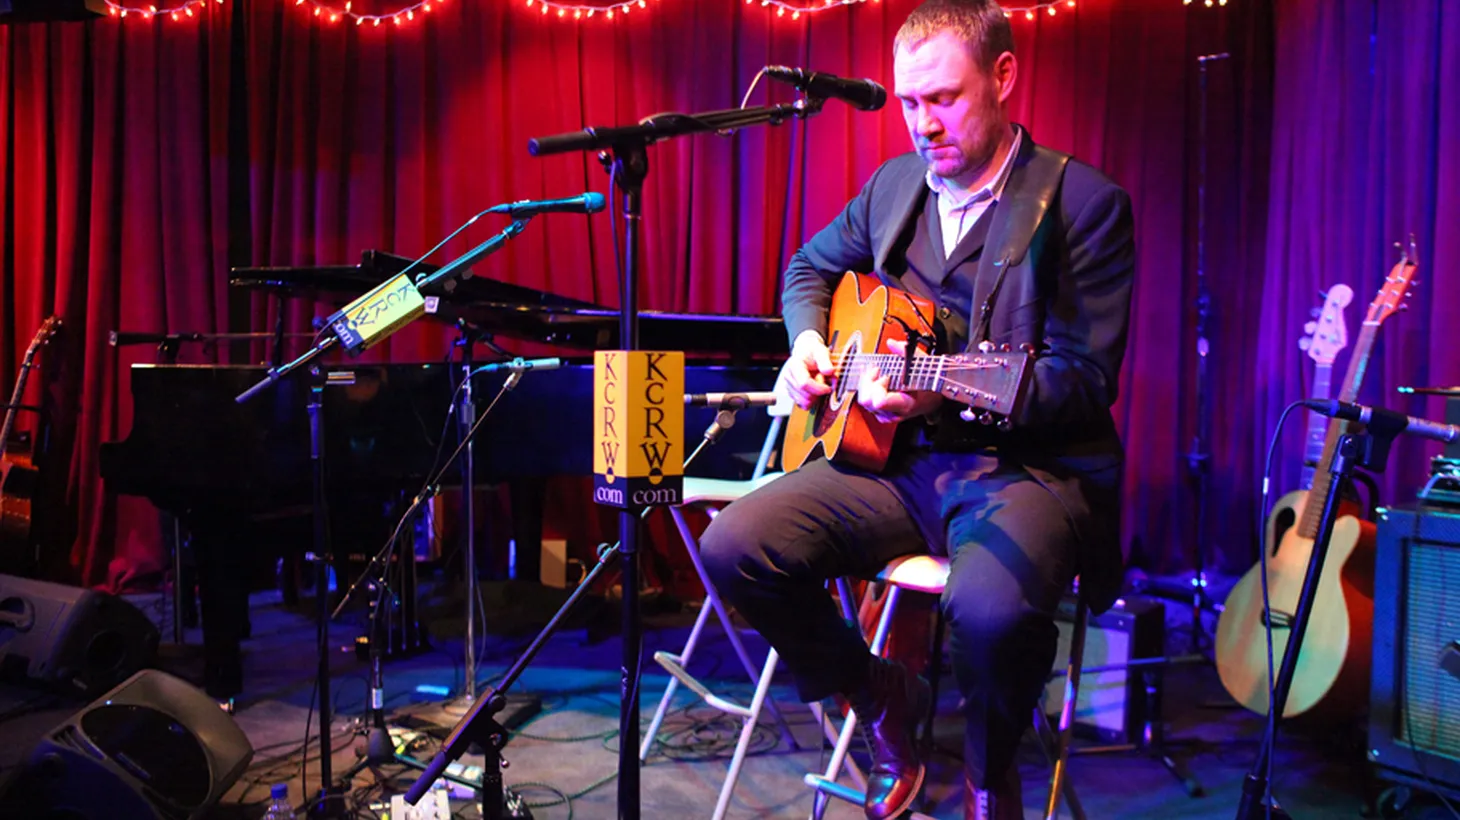 Singer David Gray recorded at KCRW's Apogee Sessions for a live audience. It's an intriguing interview and a captivating performance from a favorite KCRW artist.